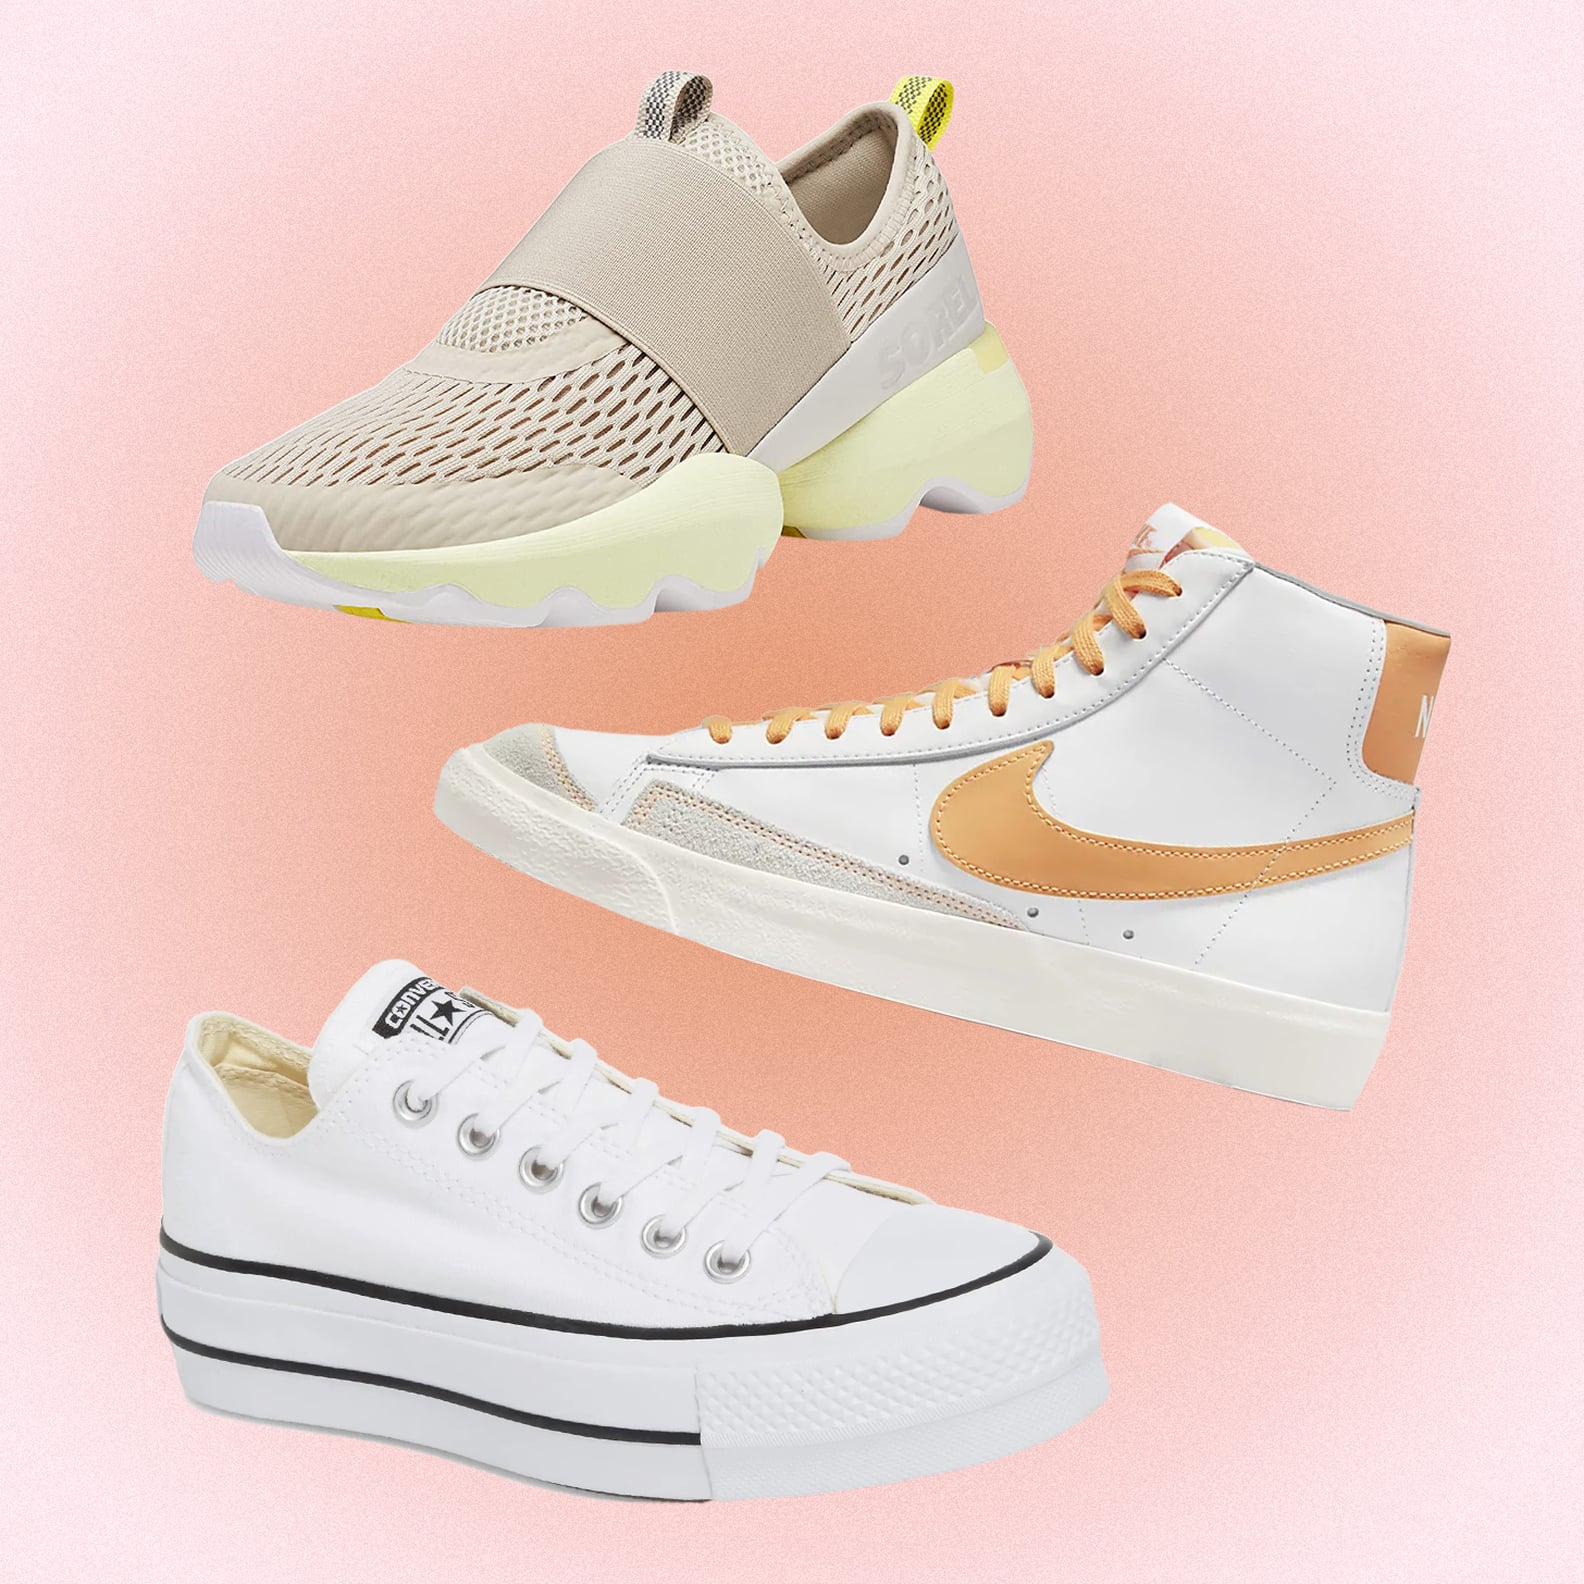 The 25 Best Sneakers For Women, From Trendy to Classic | POPSUGAR Fashion